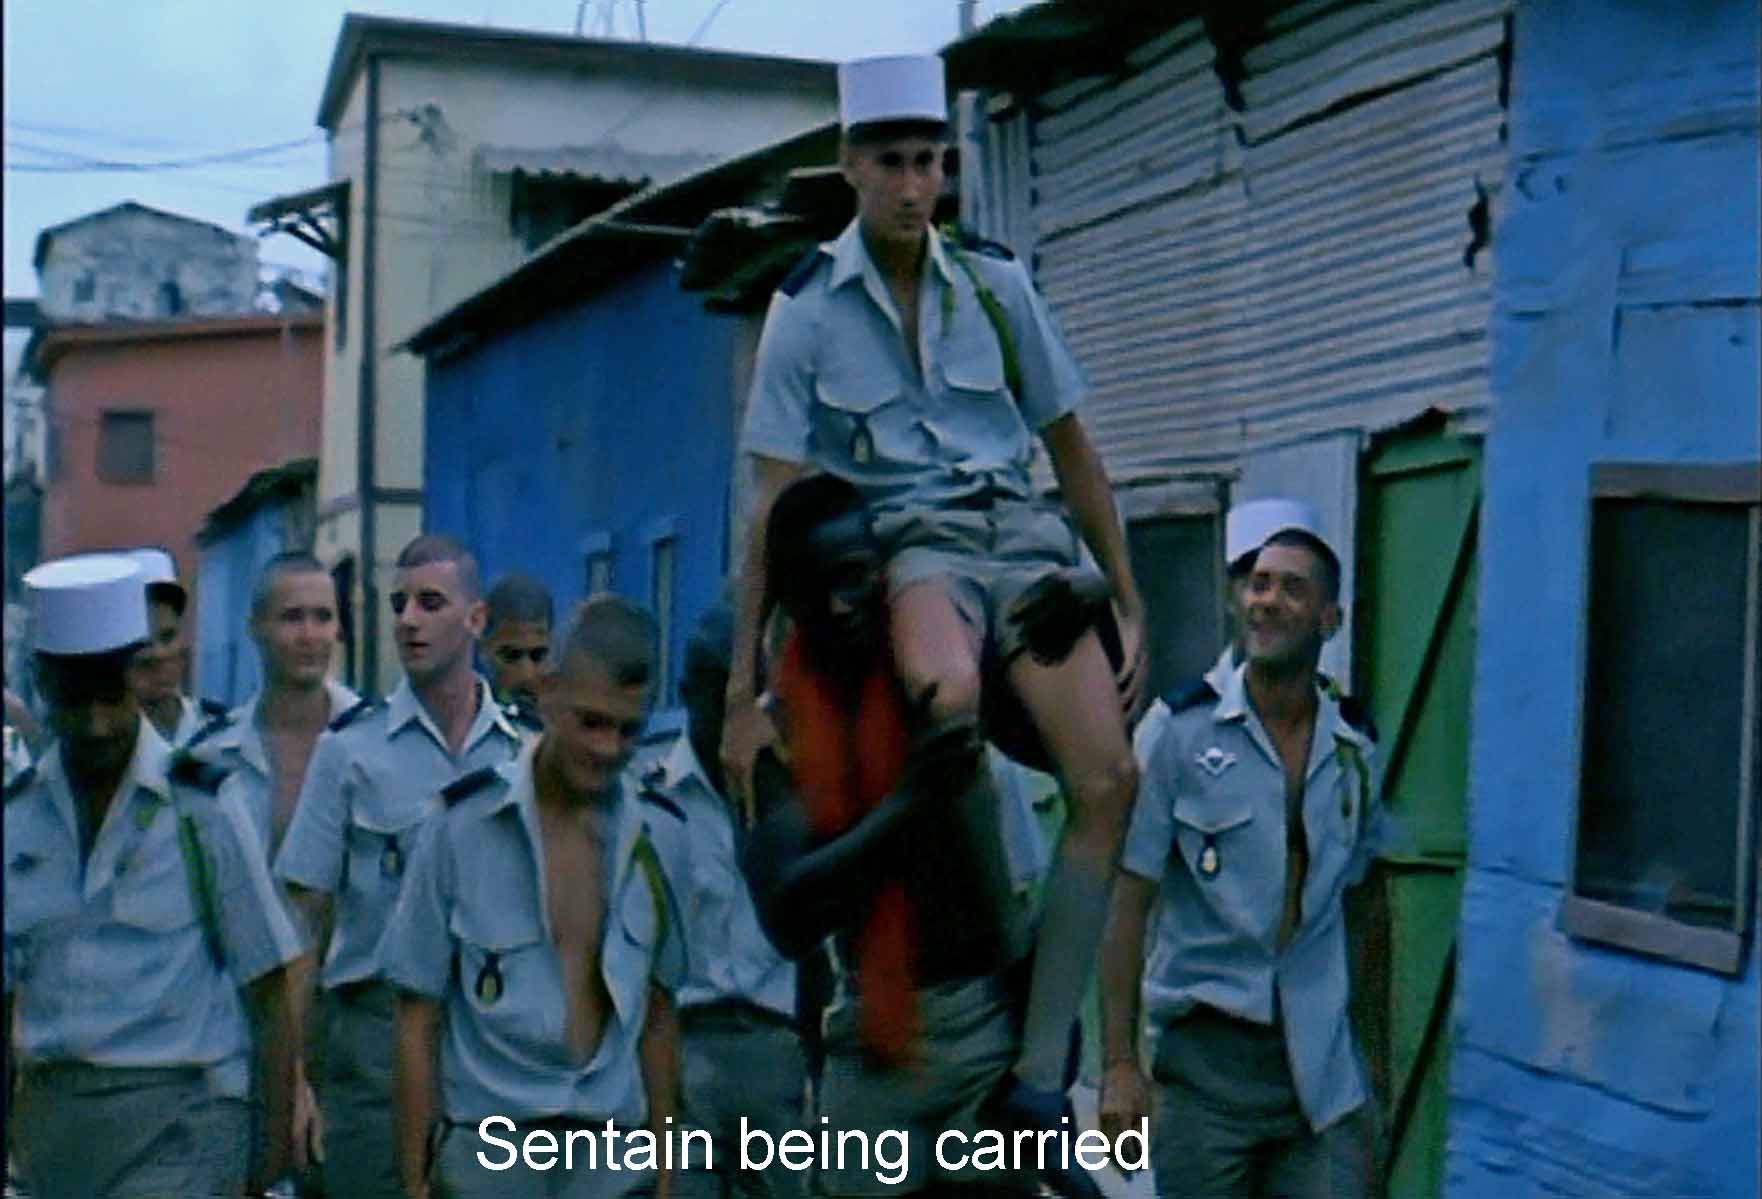 Sentain being carried